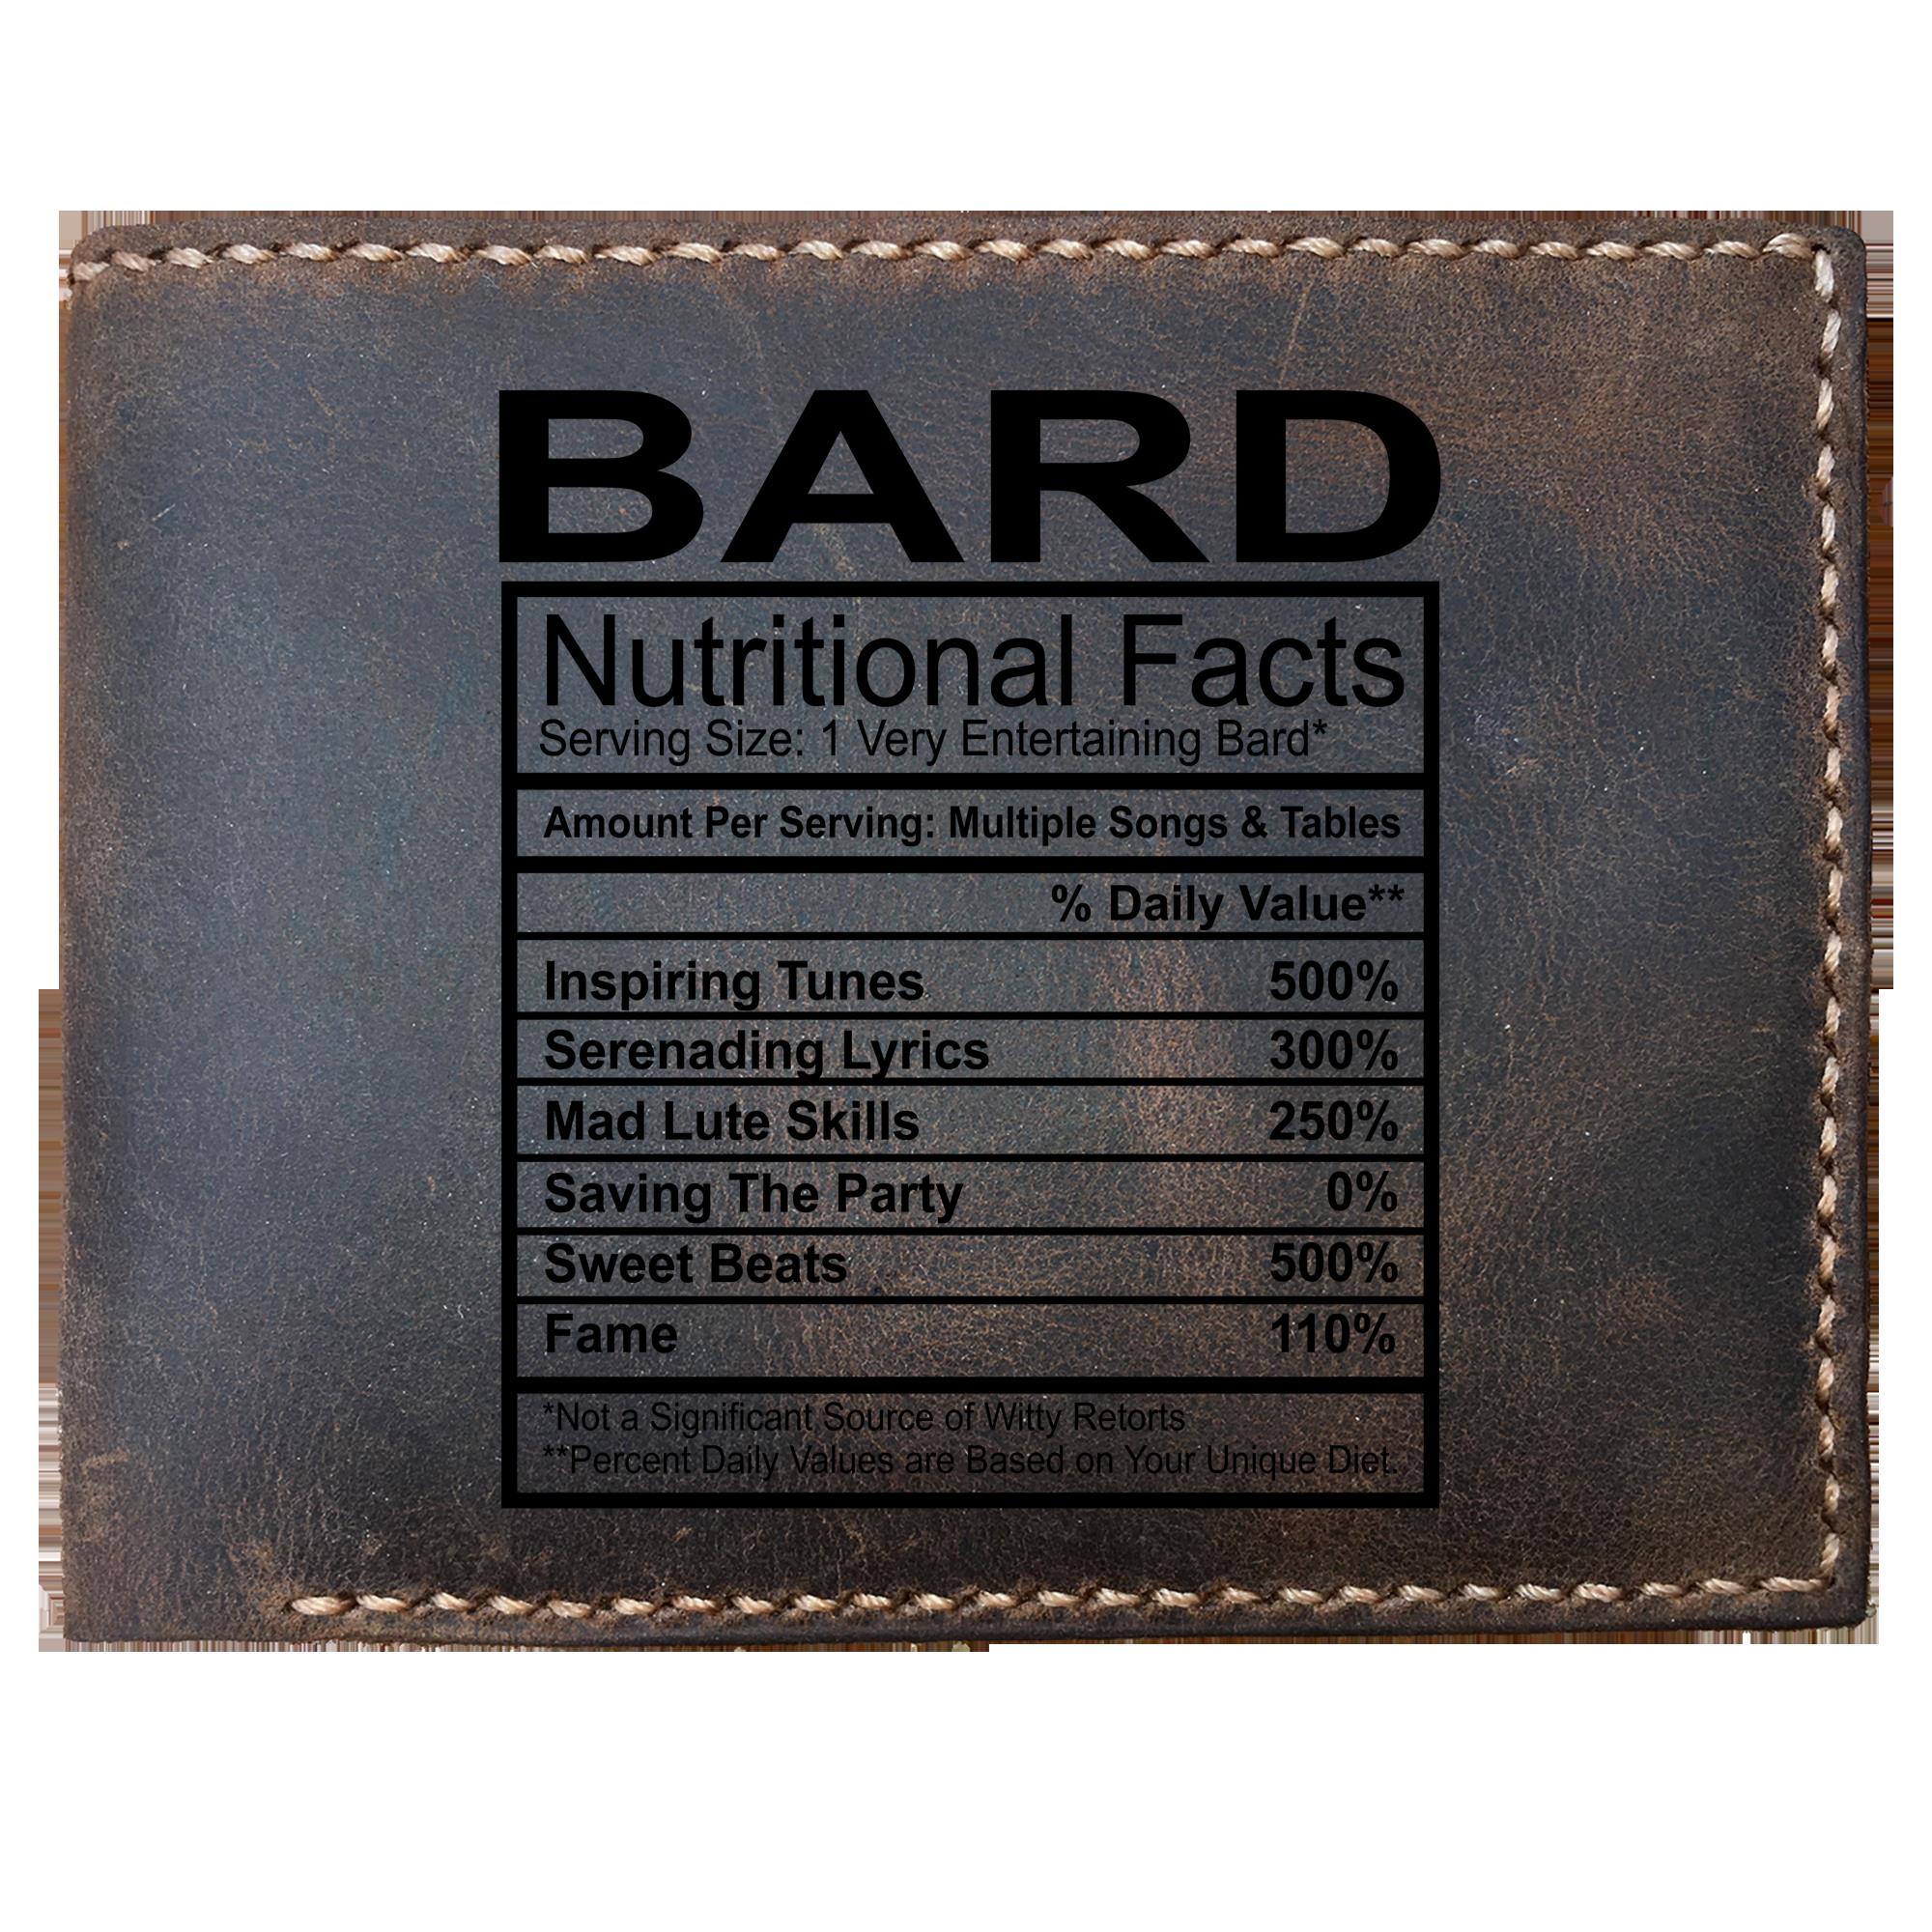 Skitongifts Funny Custom Laser Engraved Bifold Leather Wallet For Men, Bard Nutritional Facts